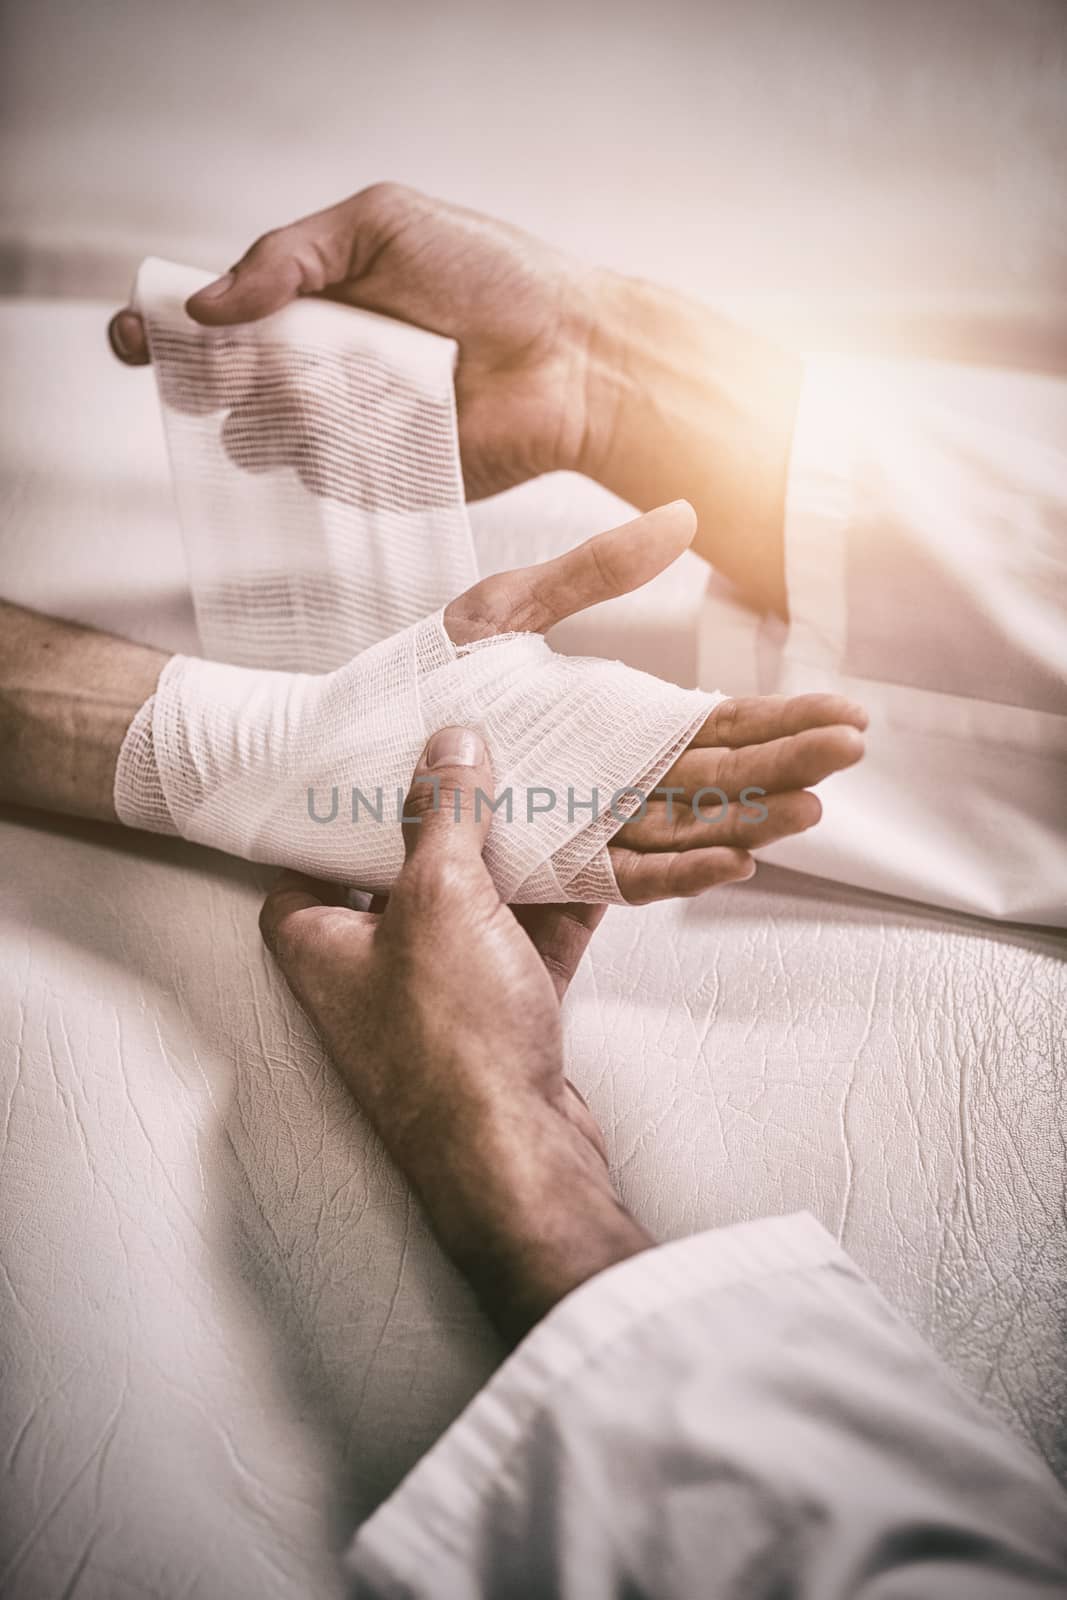 Physiotherapist putting bandage on injured hand of patient by Wavebreakmedia